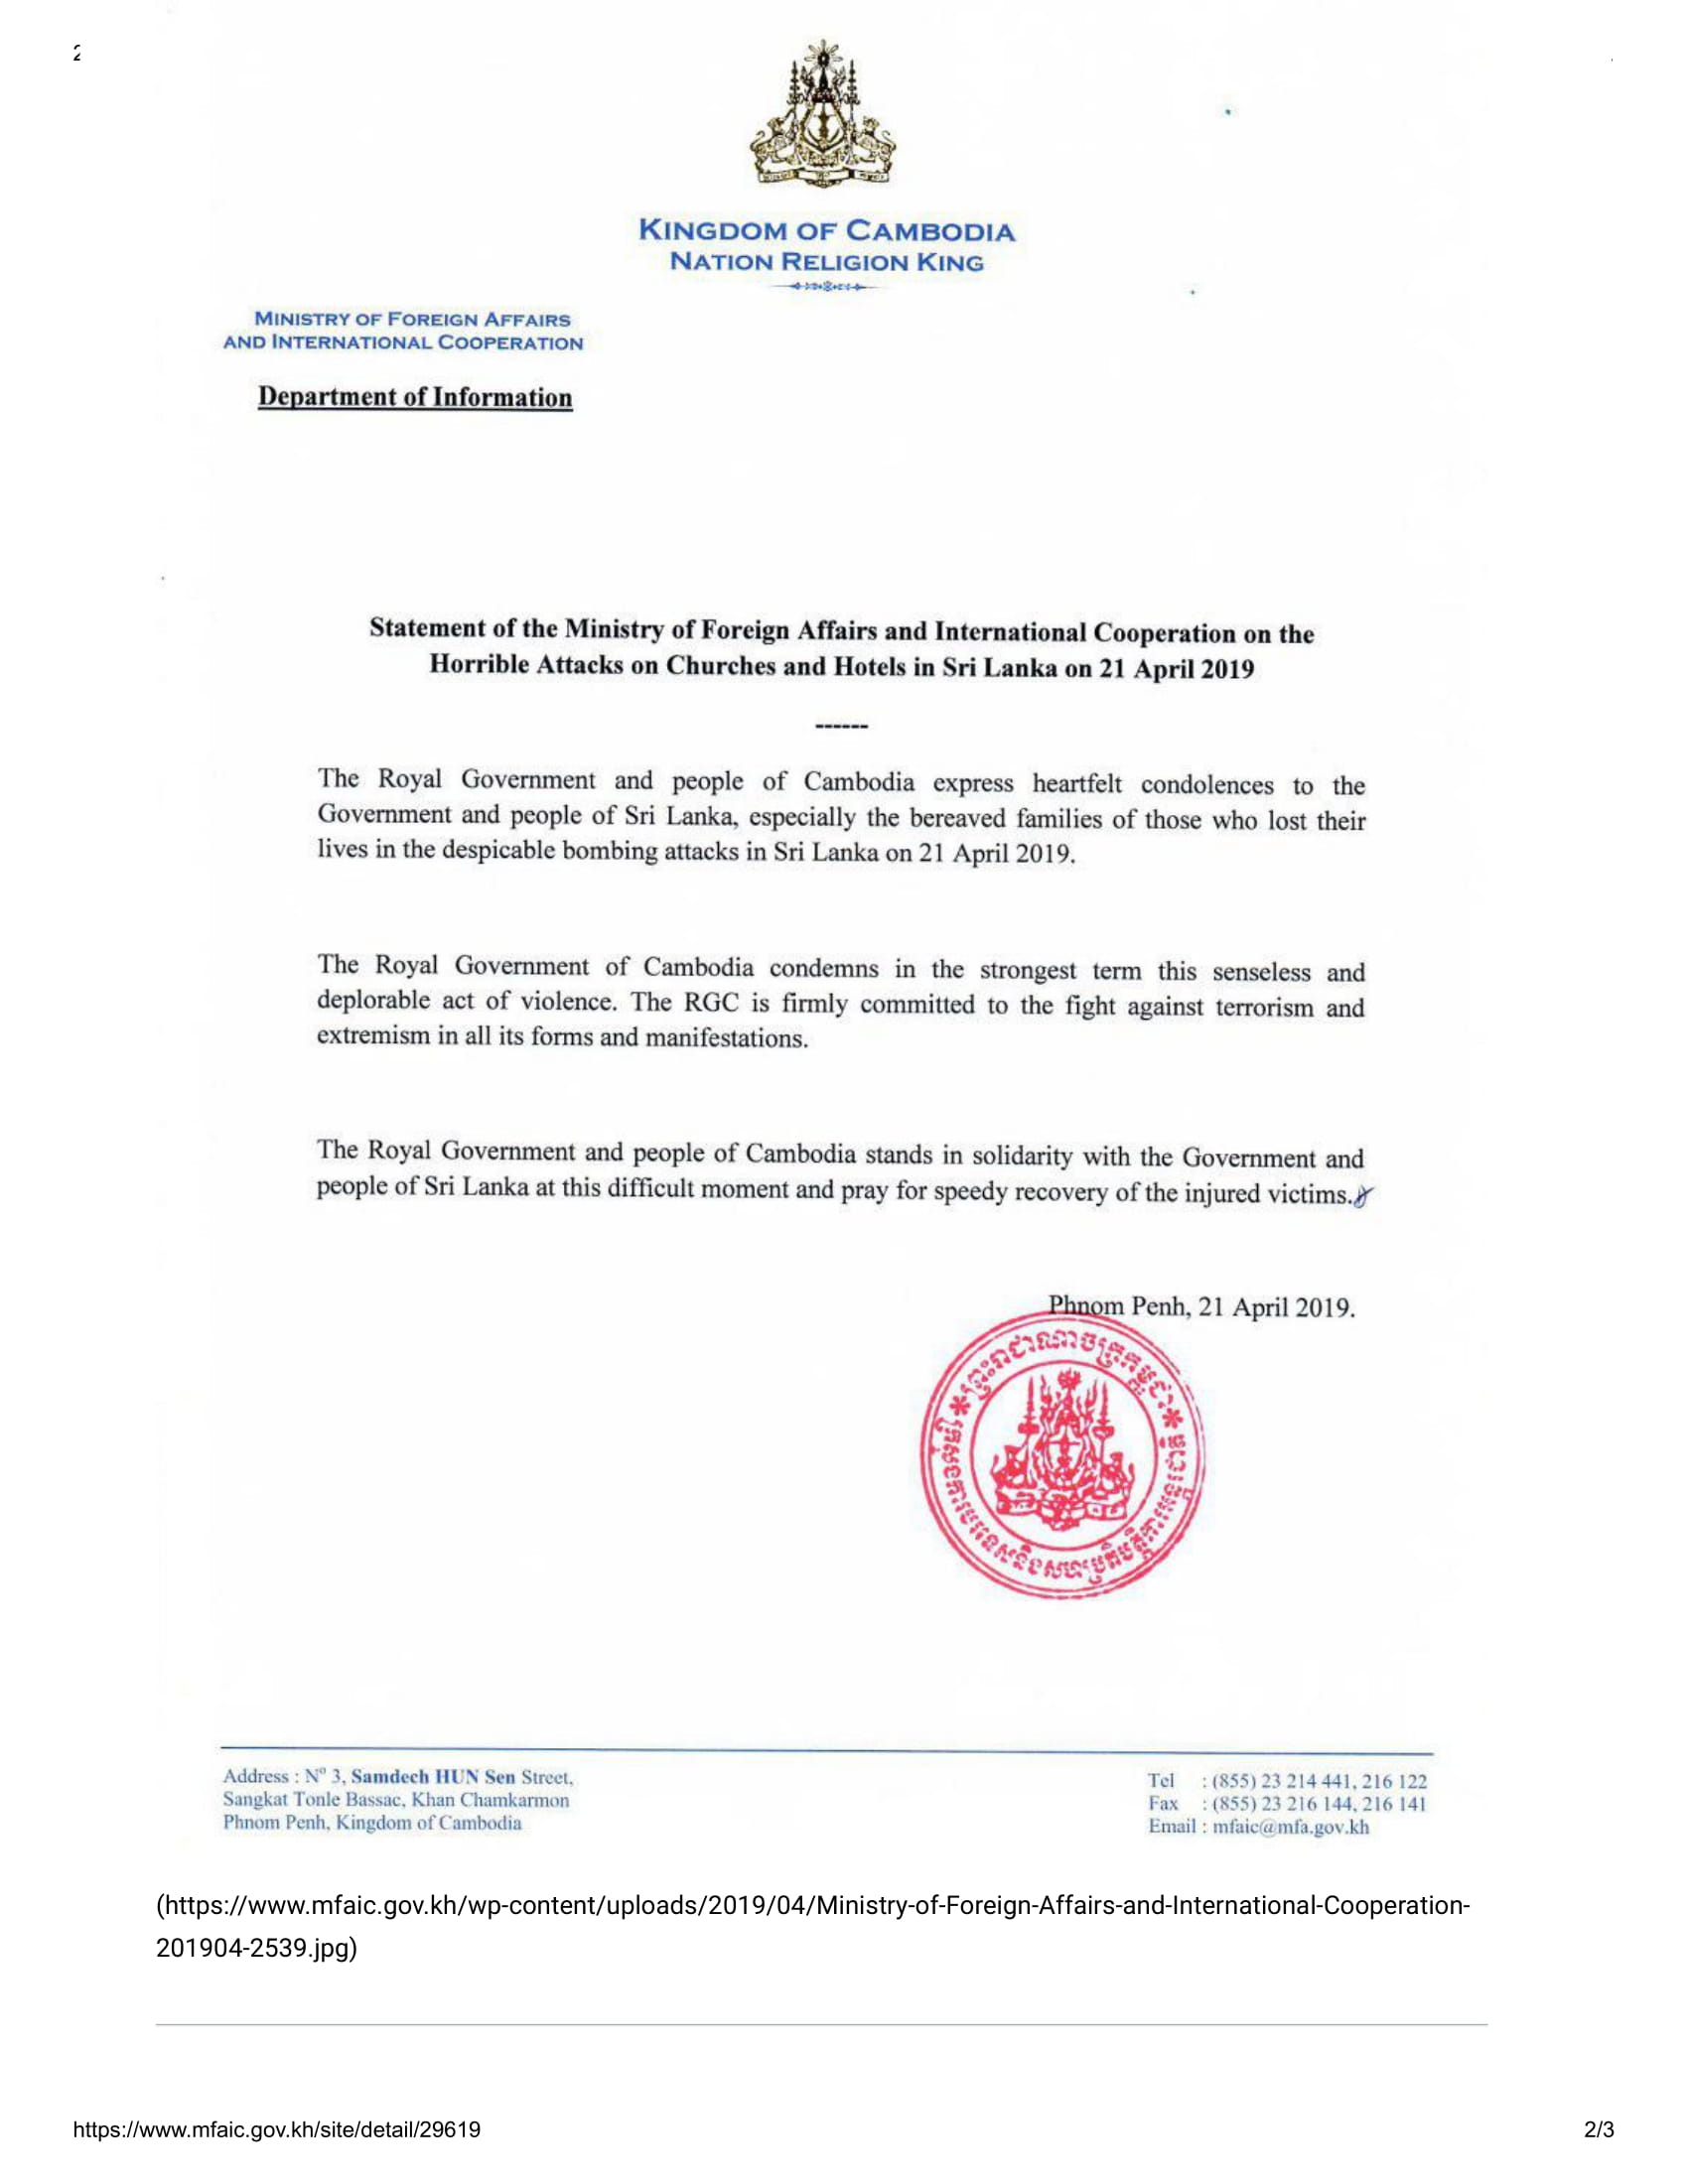 Cambodia - Statement of the Ministry of Foreign Affairs and International Cooperation-1